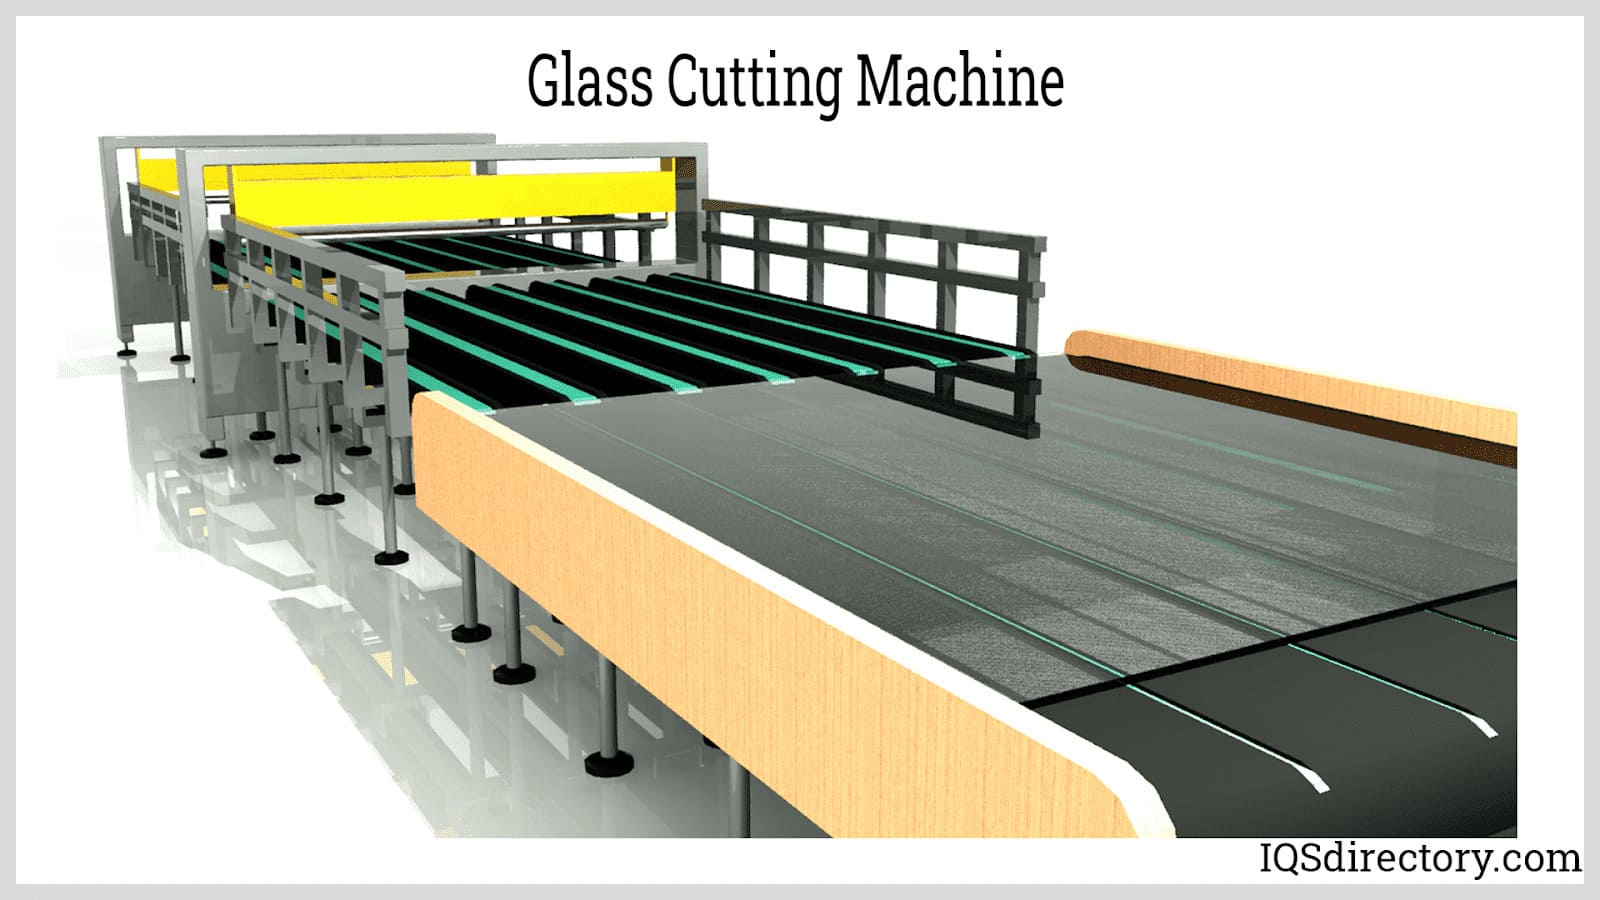 Strip Cutter: Do You Really Need One to Cut Perfect Glass Strips?